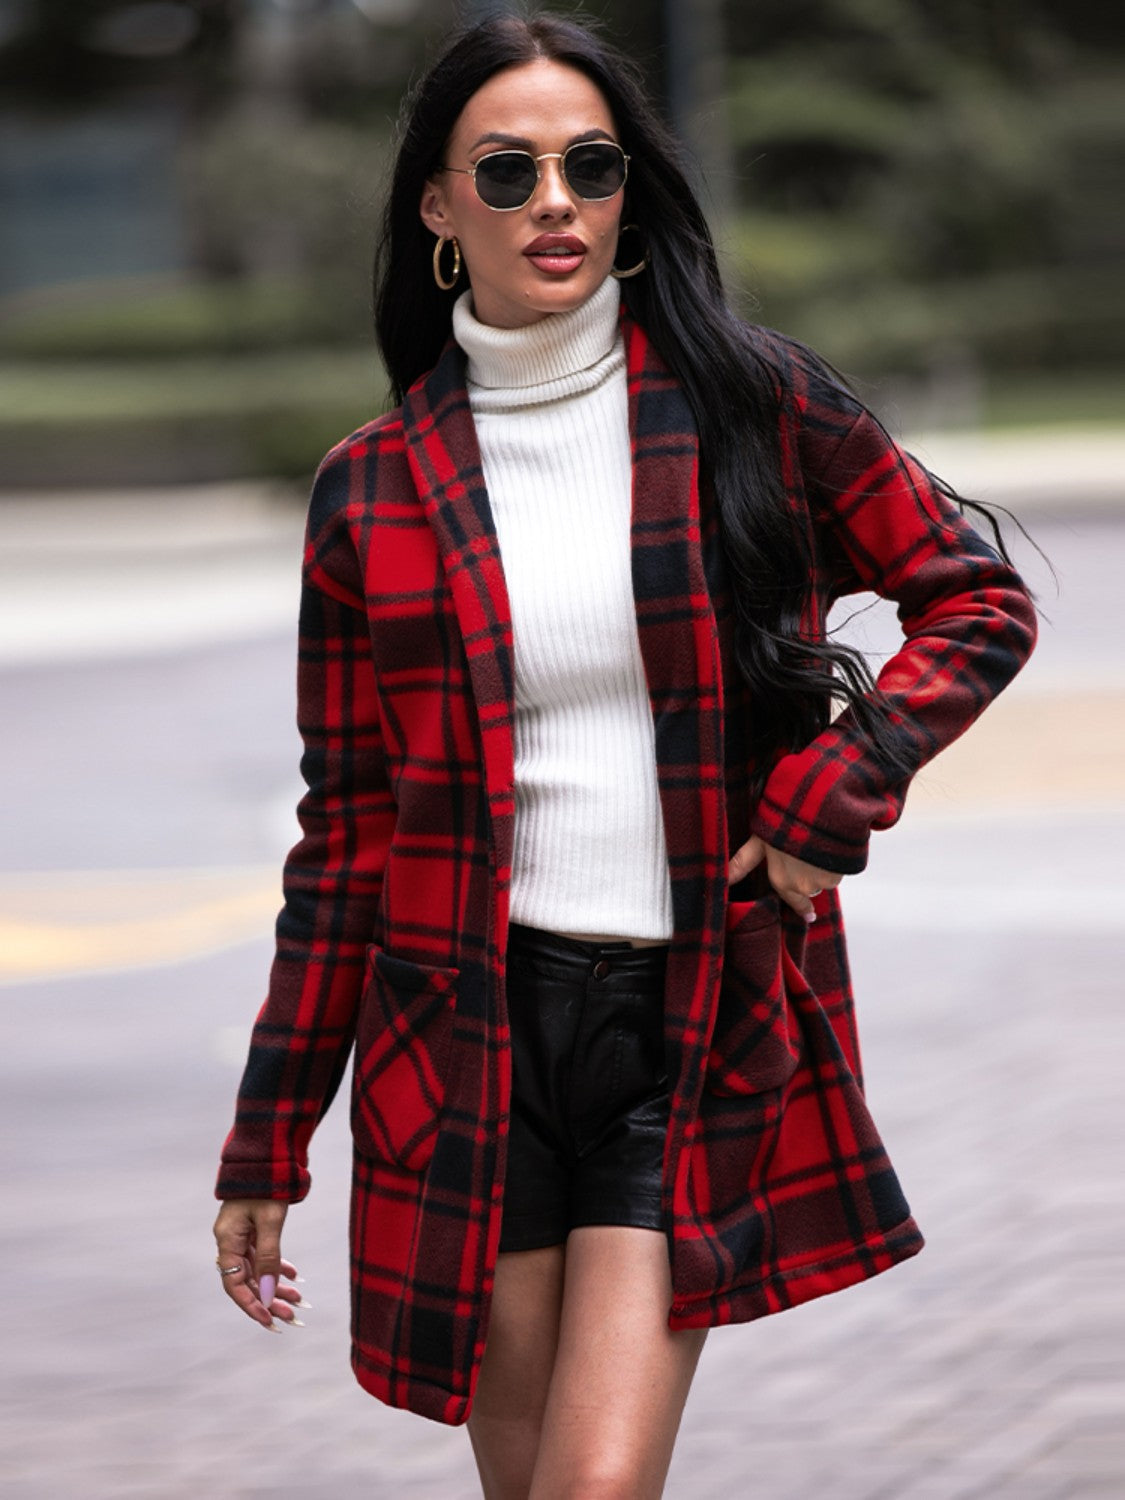 Plaid Shawl Collar Coat with Pockets BLUE ZONE PLANET